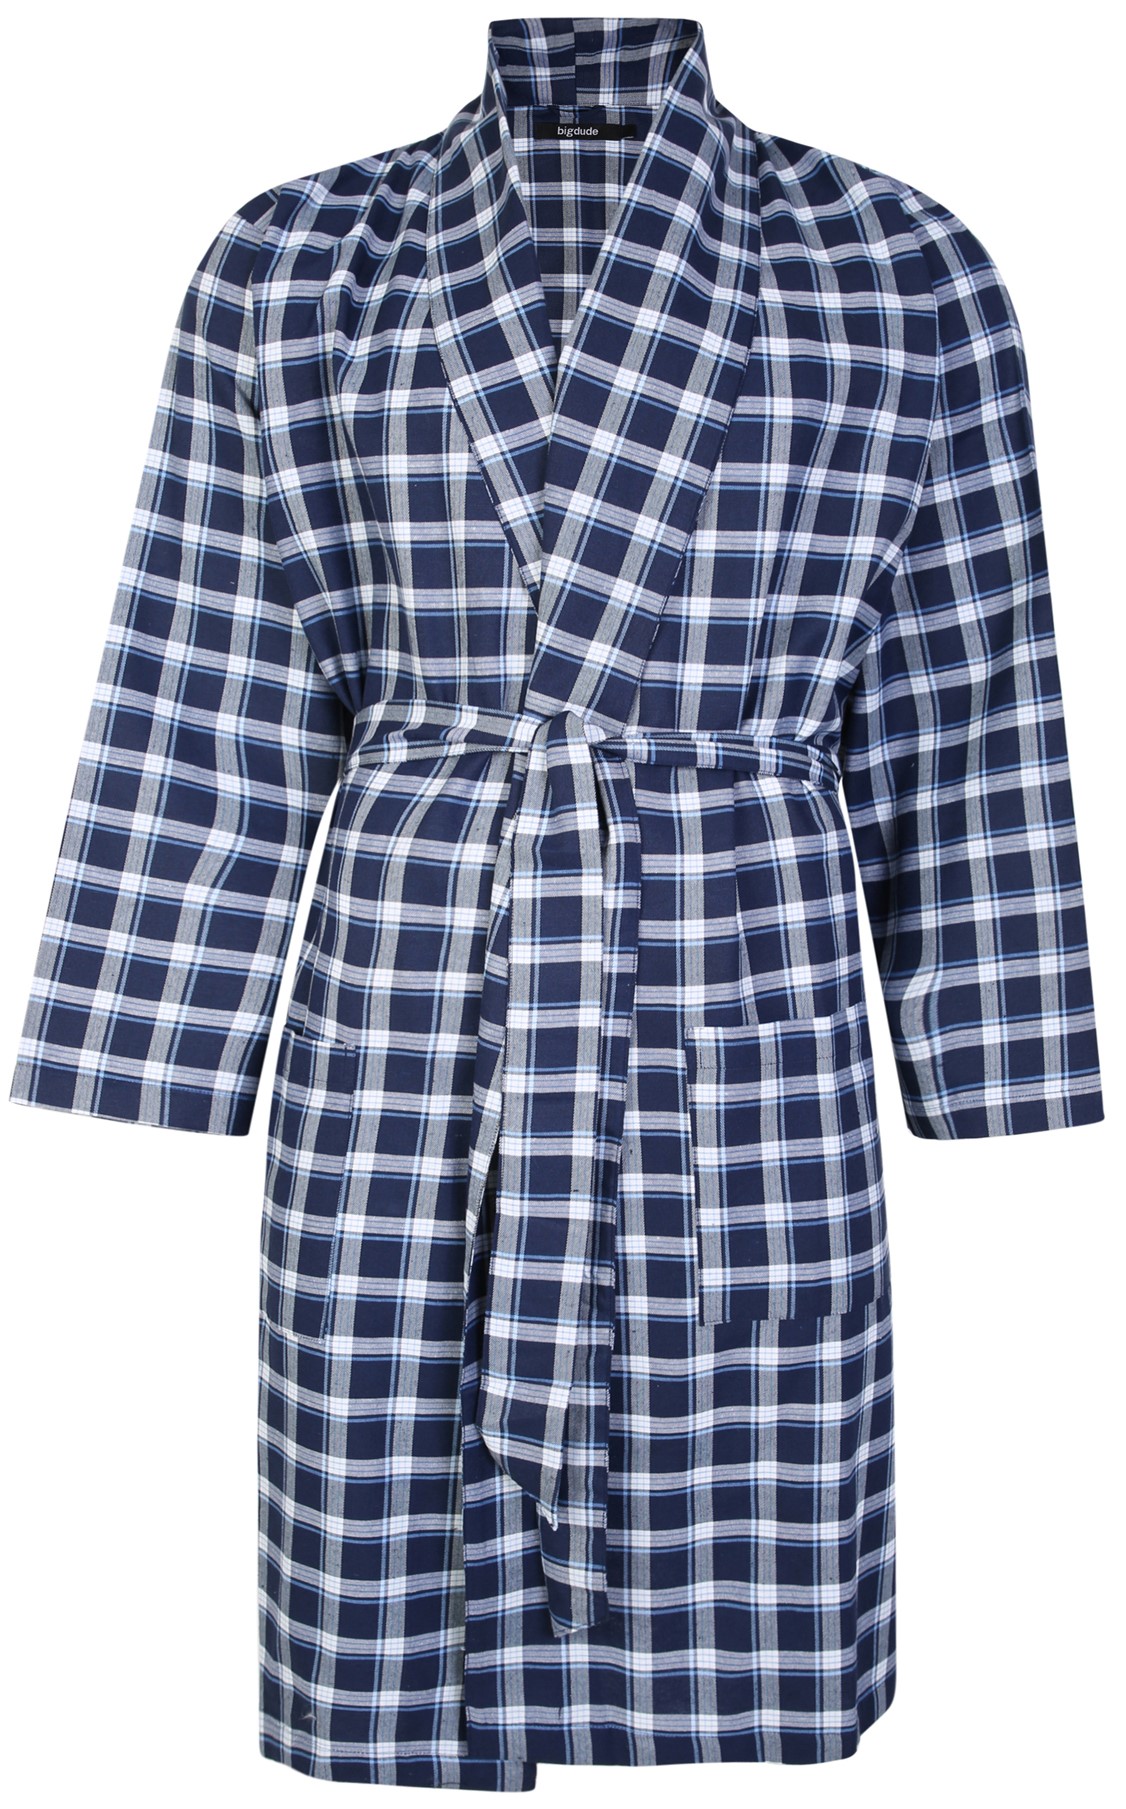 The best dressing gowns for men